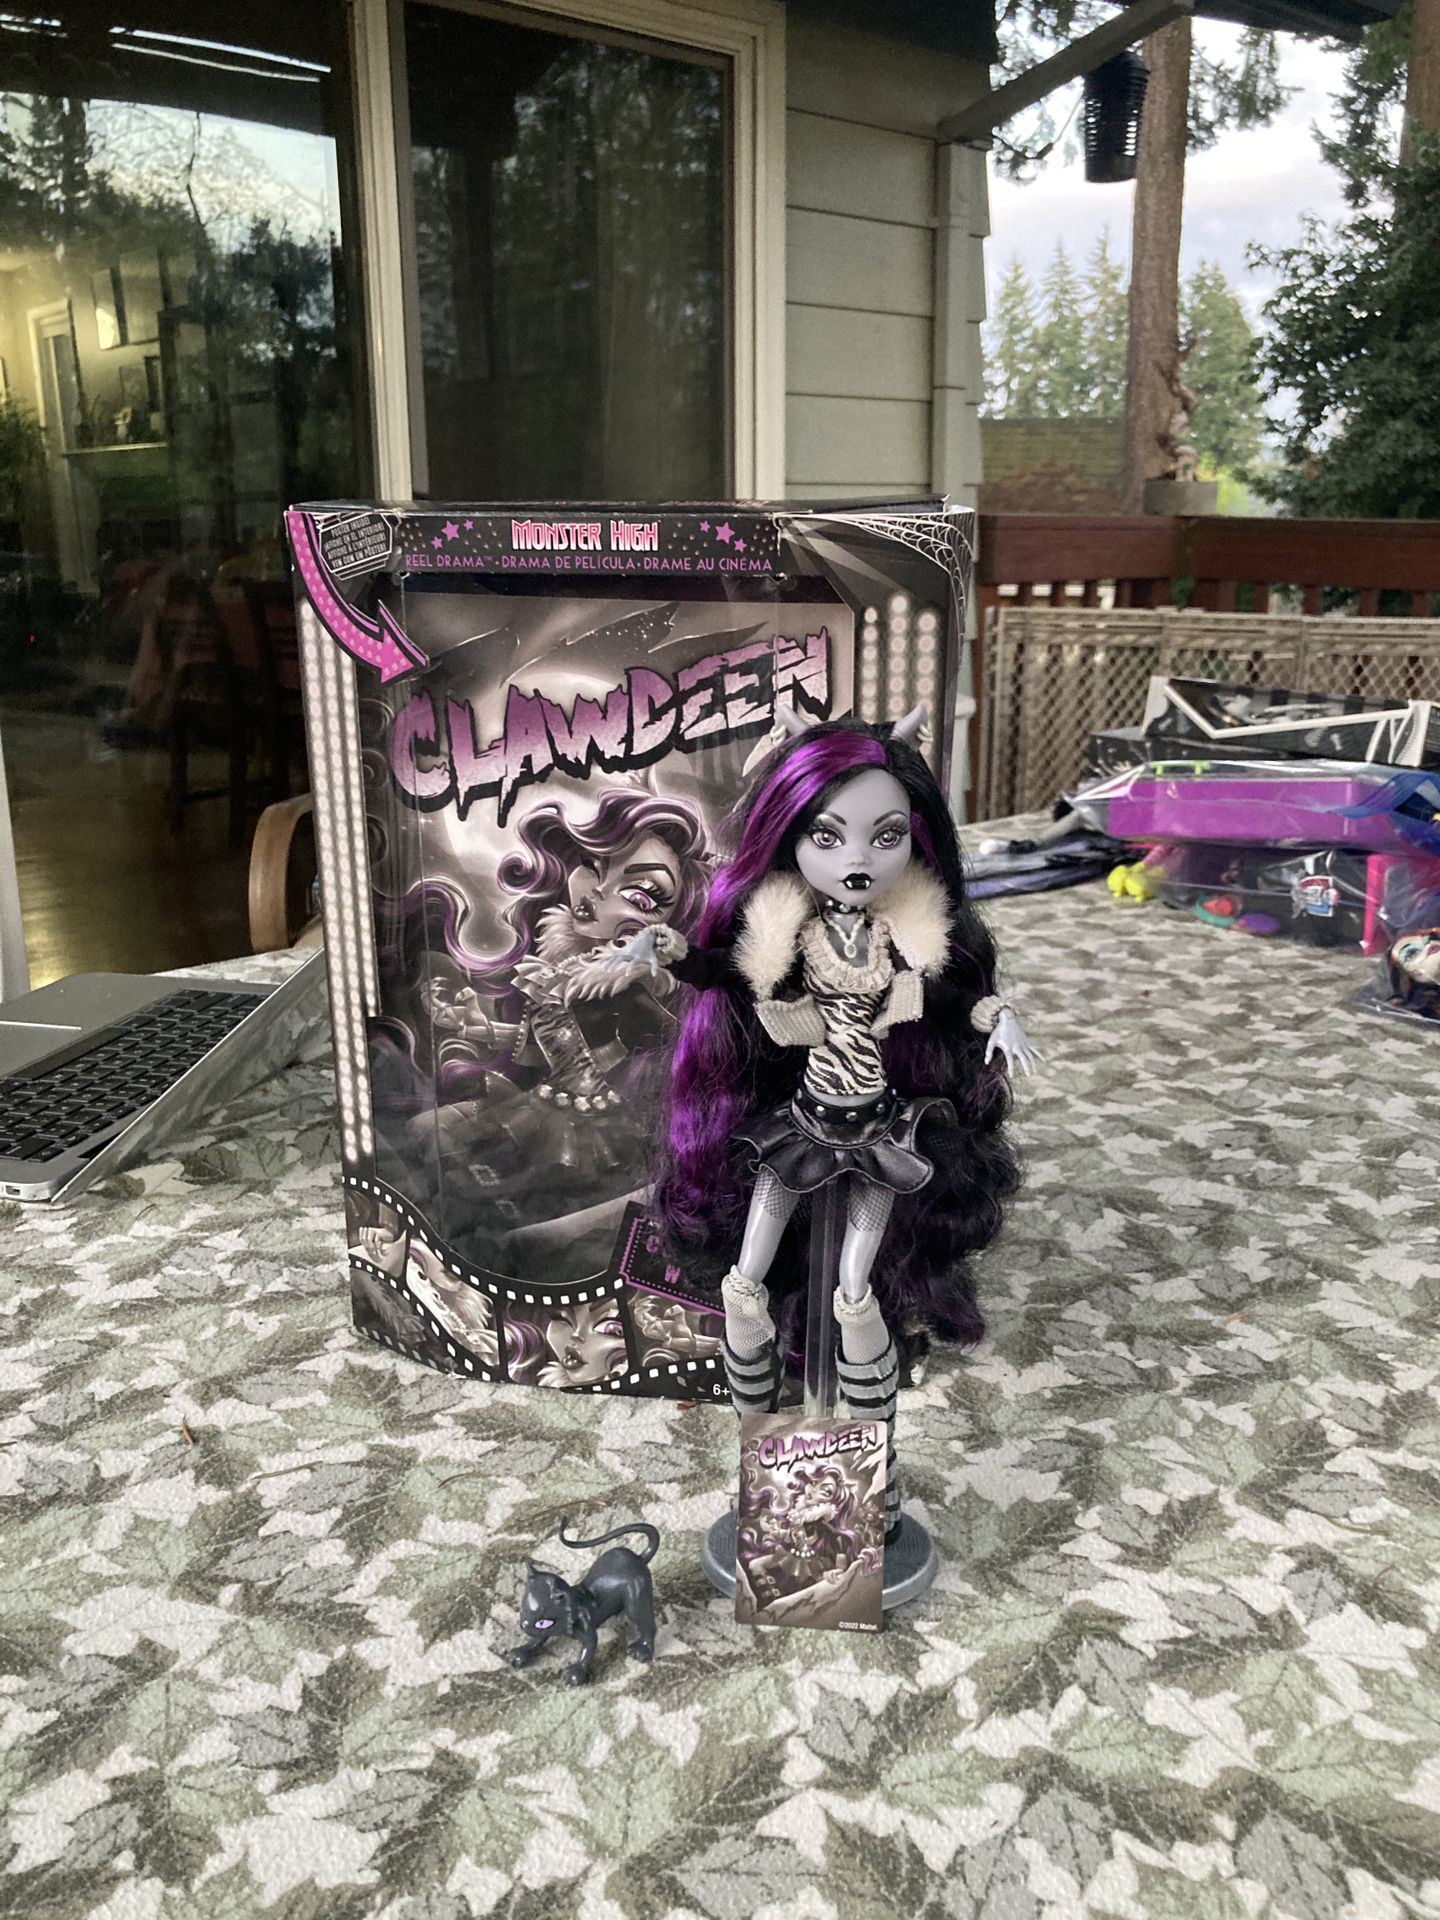 Complete Reel Drama Clawdeen Wolf Doll for Sale in Clackamas, OR - OfferUp